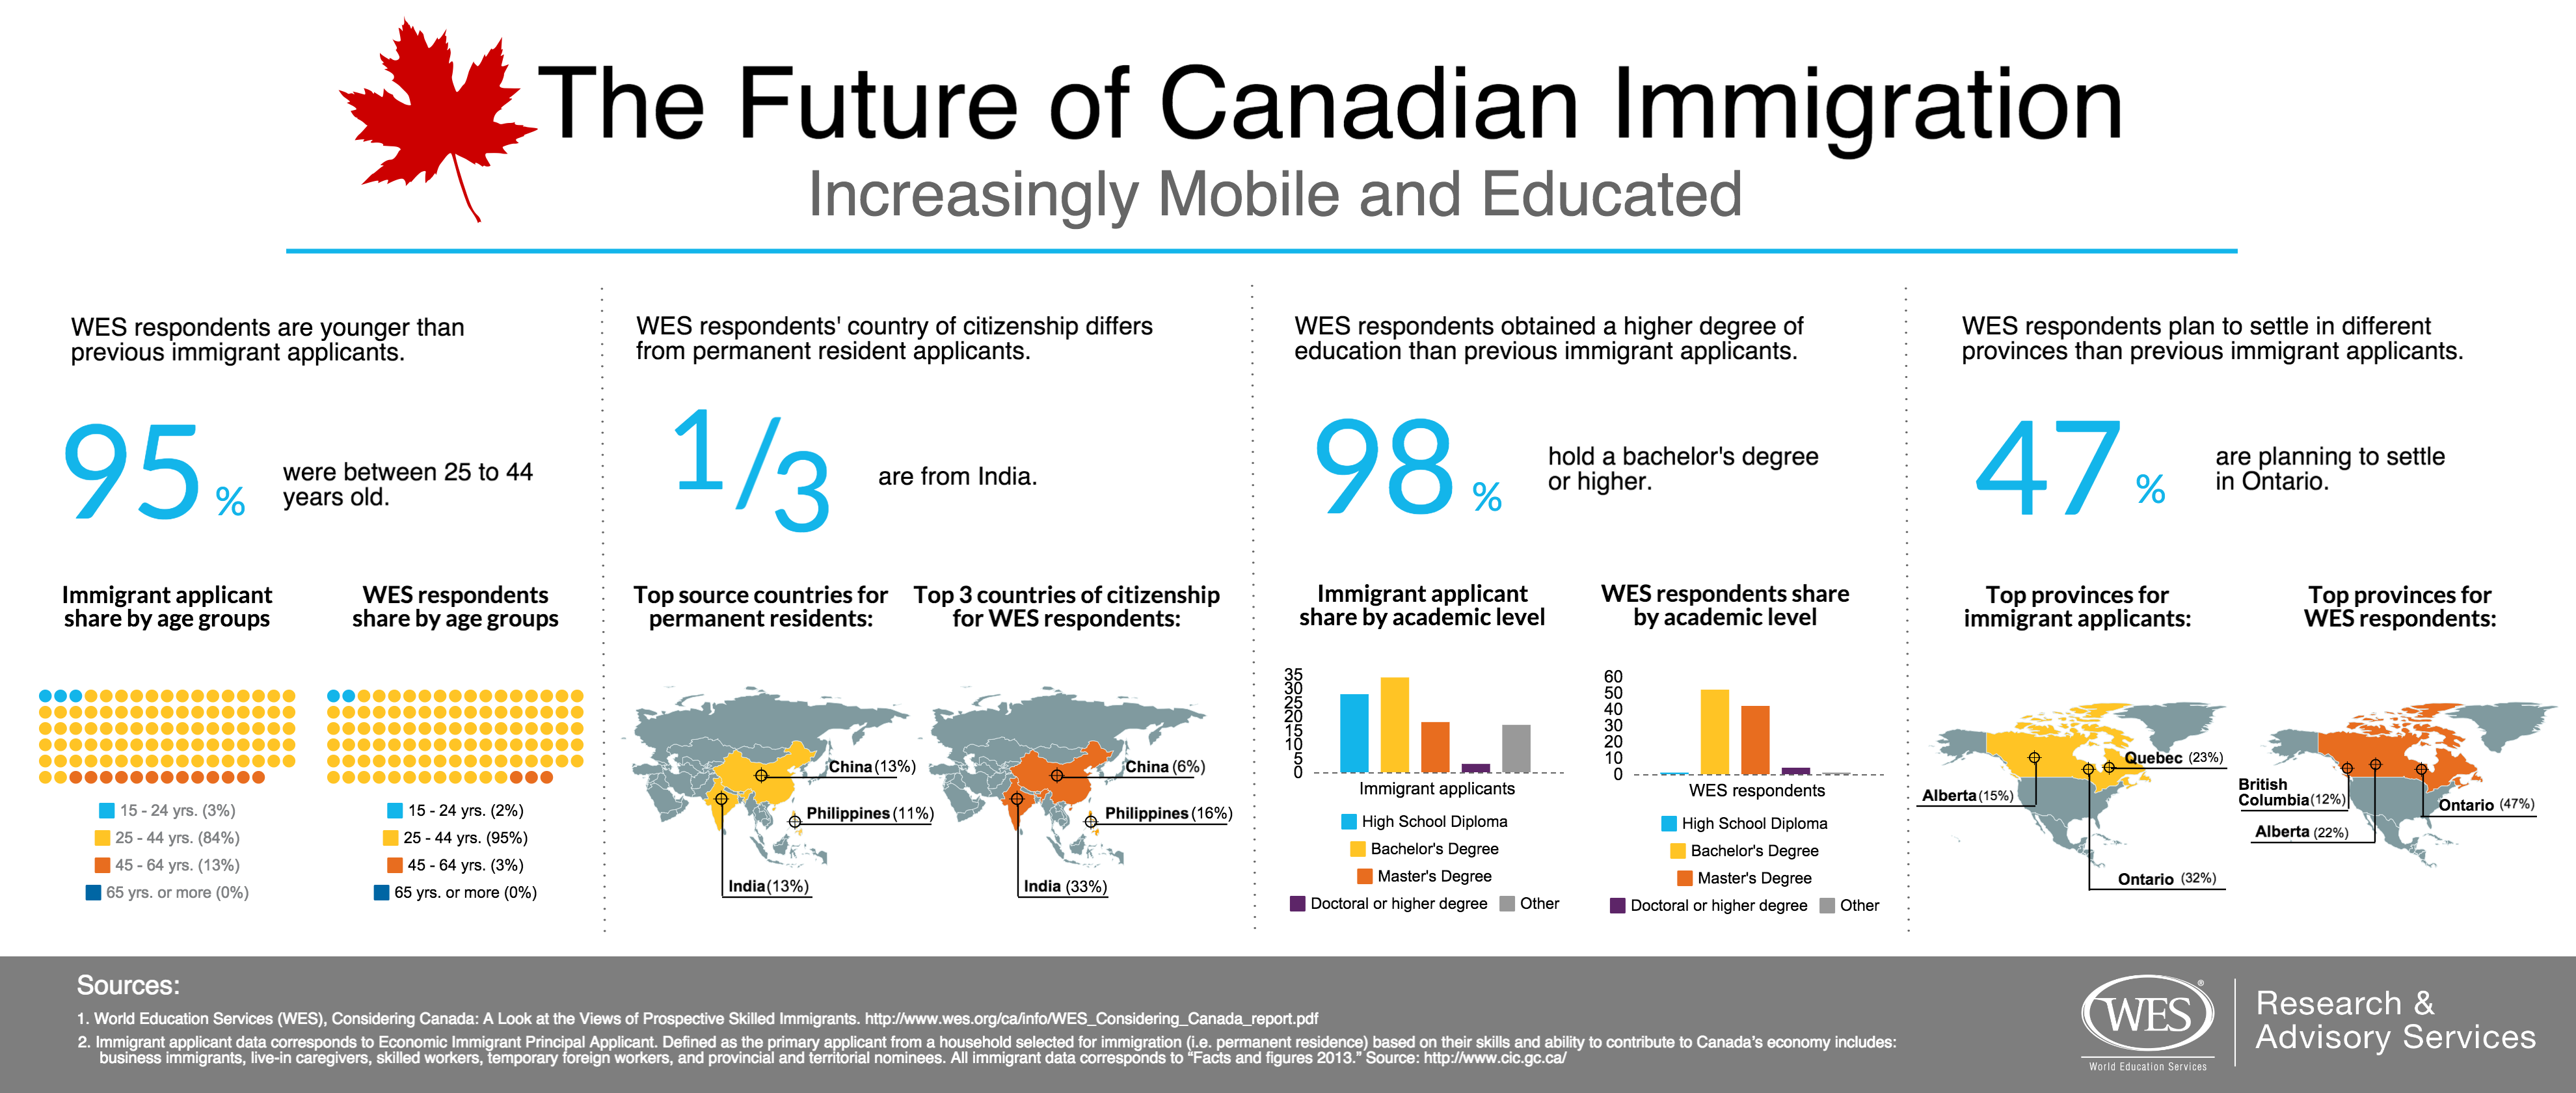 Increasingly Mobile and Educated The Future of Canadian Immigration